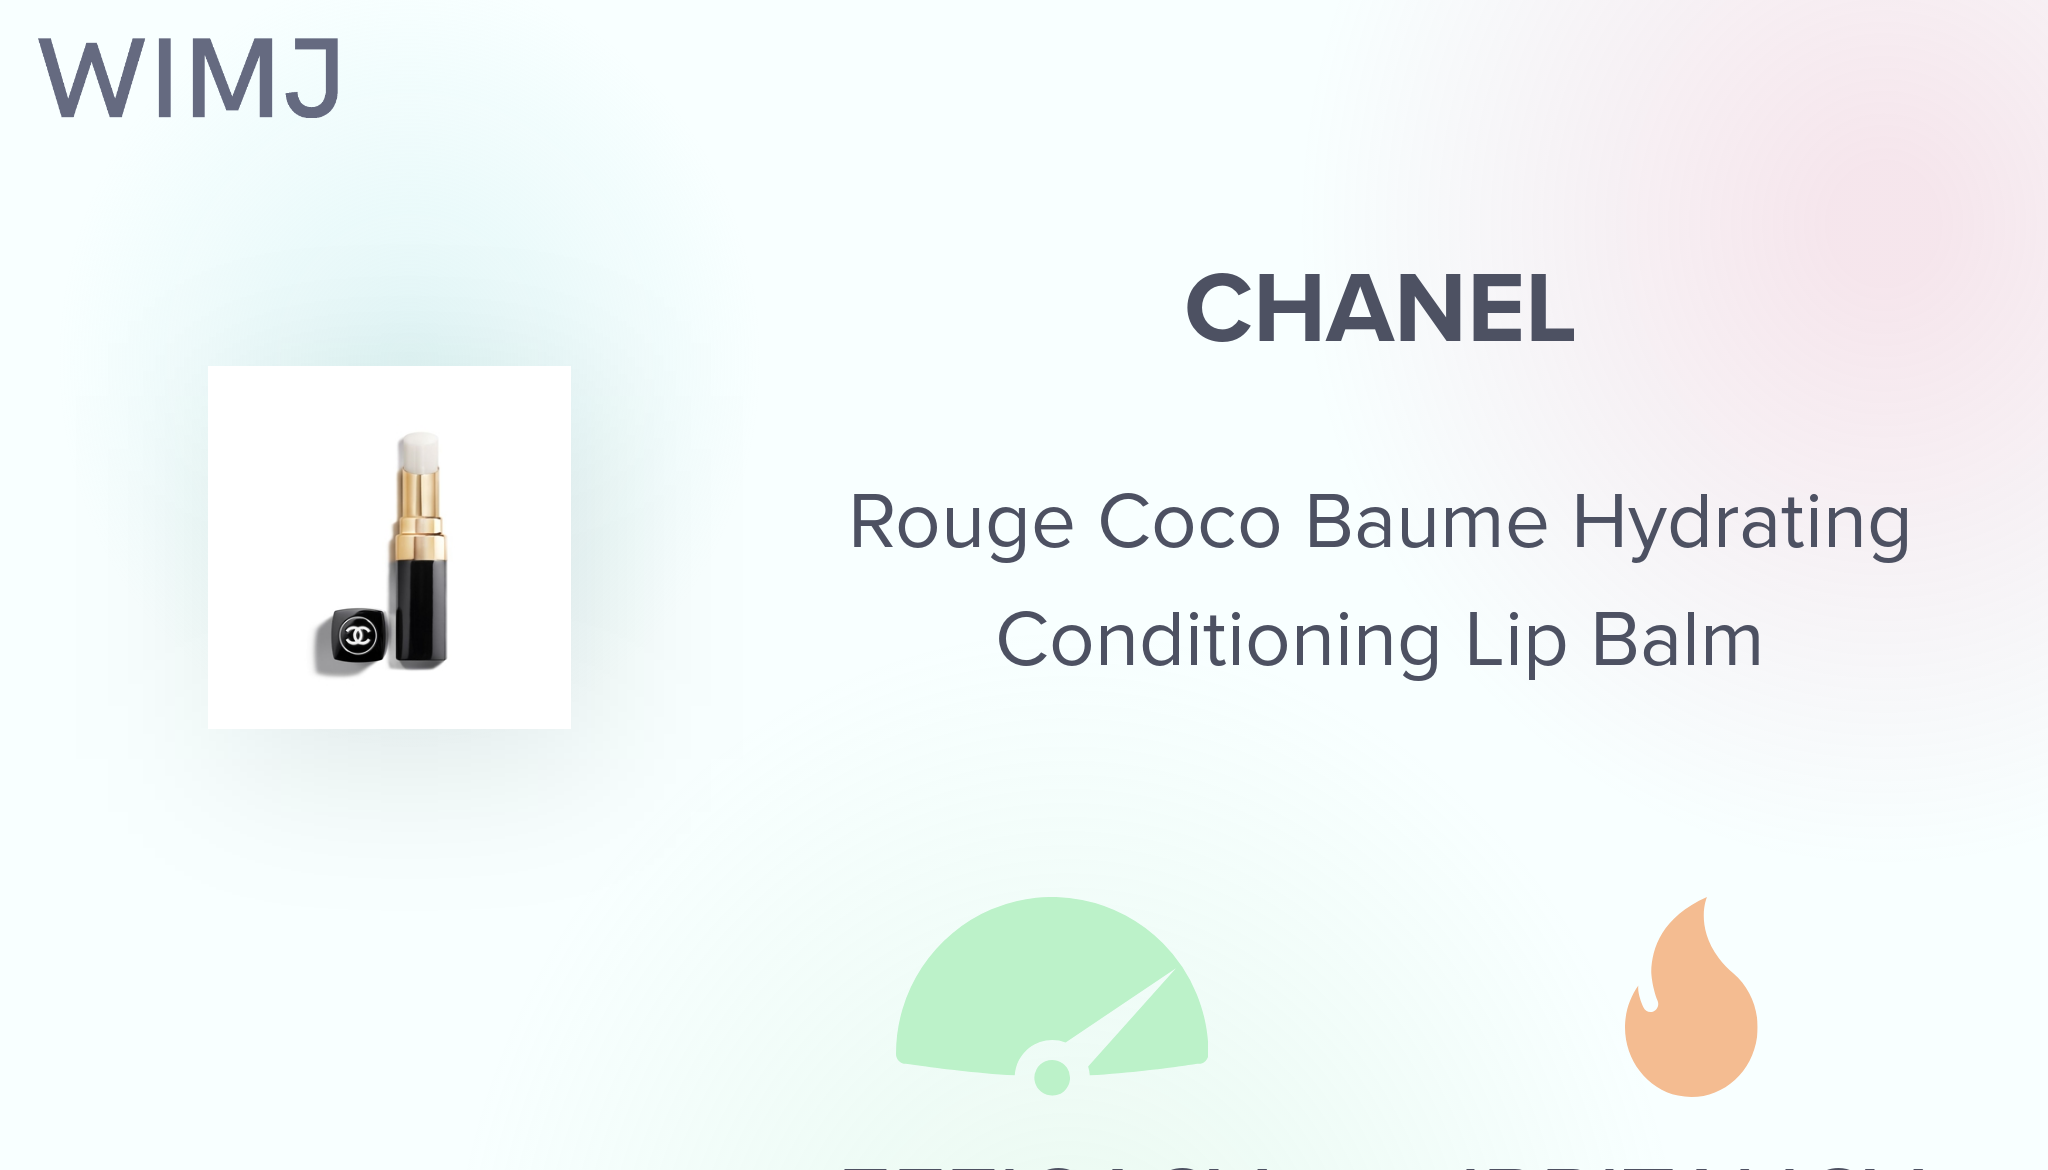 CHANEL ROUGE COCO BAUME Hydrating Conditioning Lip Balm - Reviews